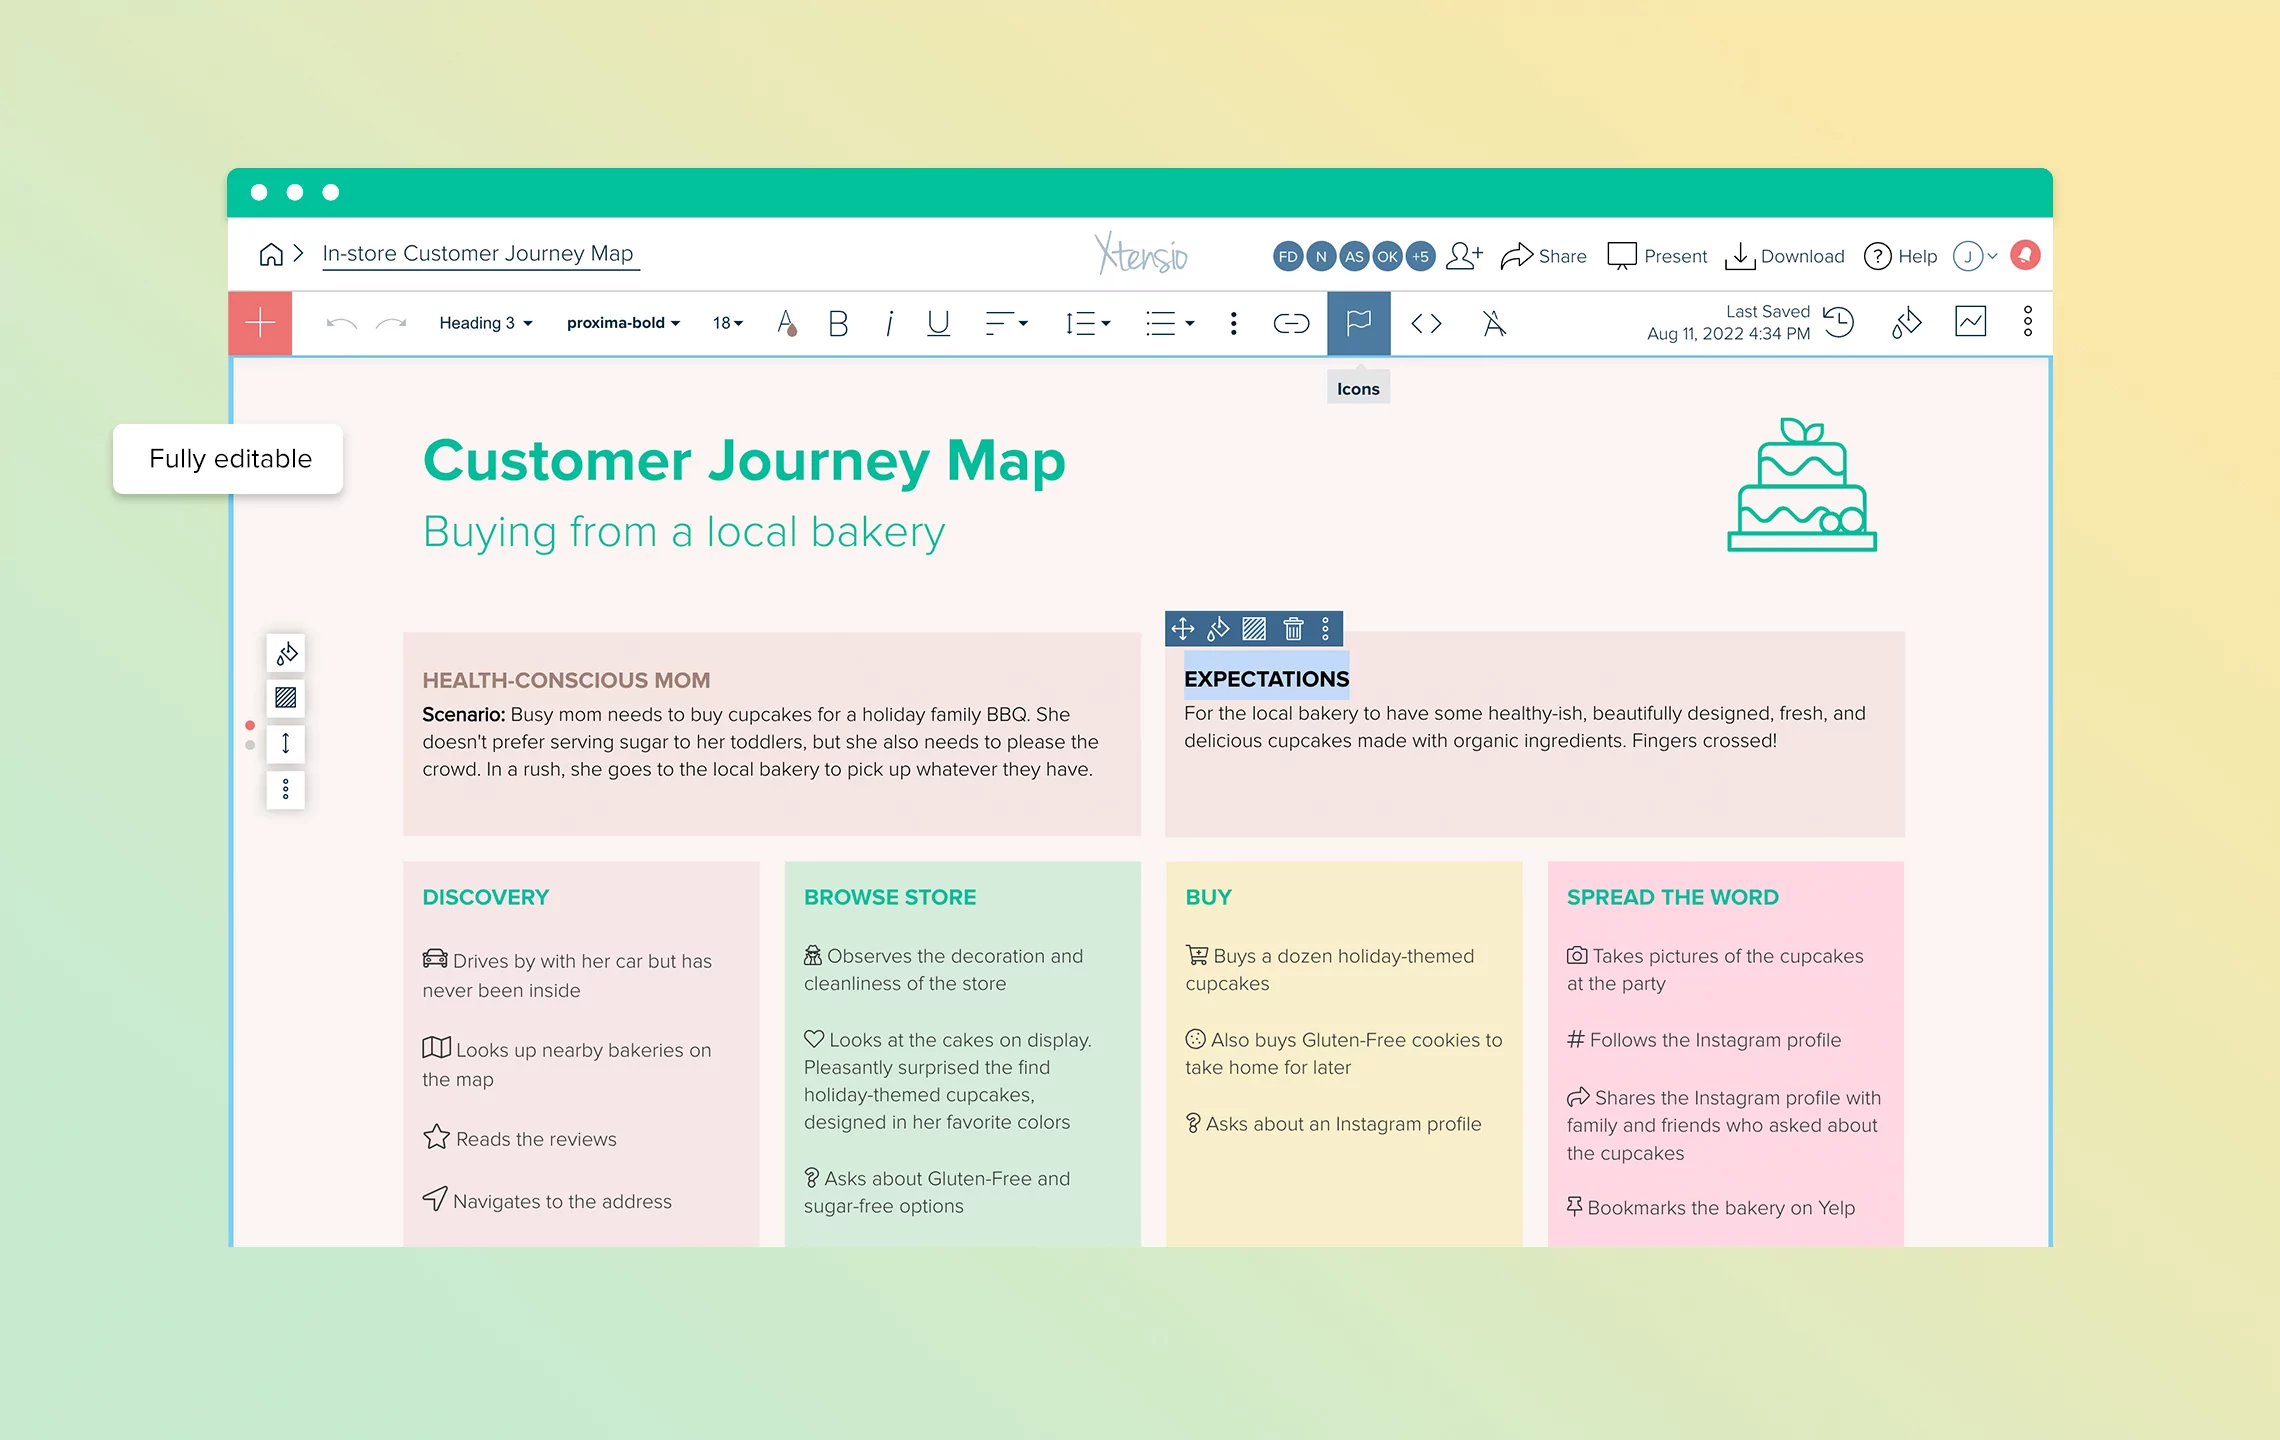 Customer Journey Map Variations: In-Store Customer Journey Map